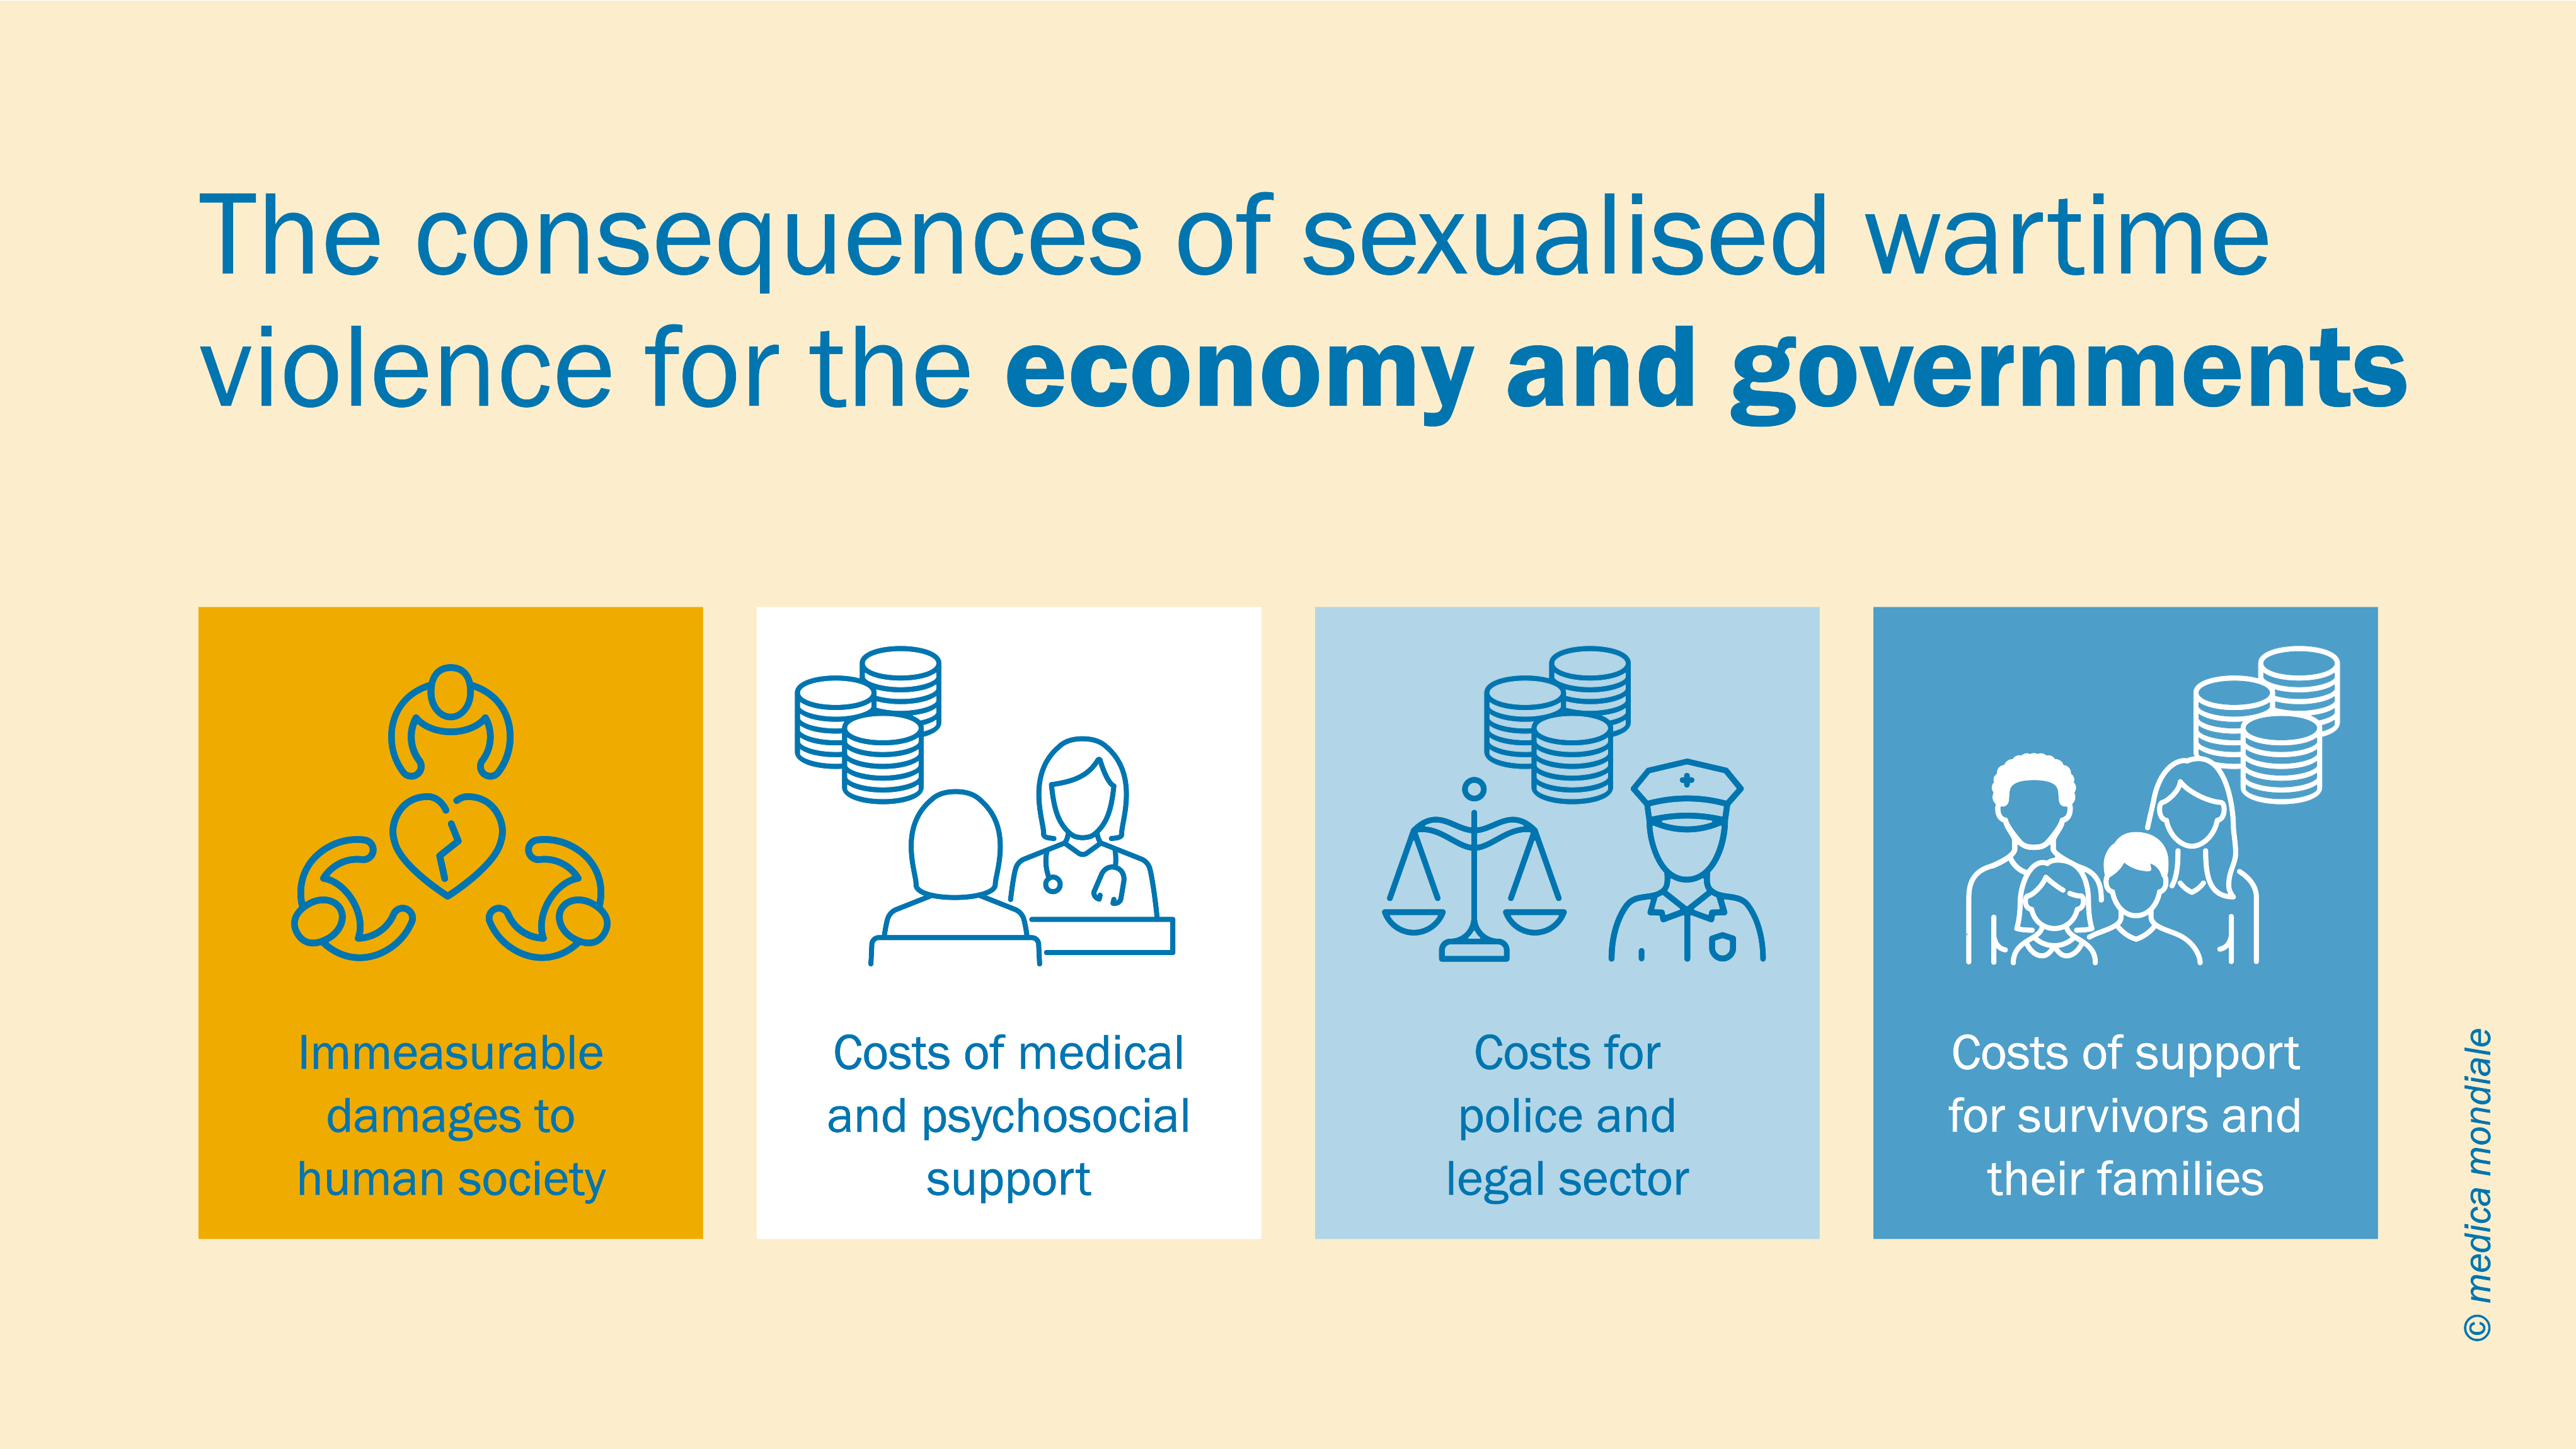 Infographic illustrating the consequences of sexualised wartime violence for governments and economy.